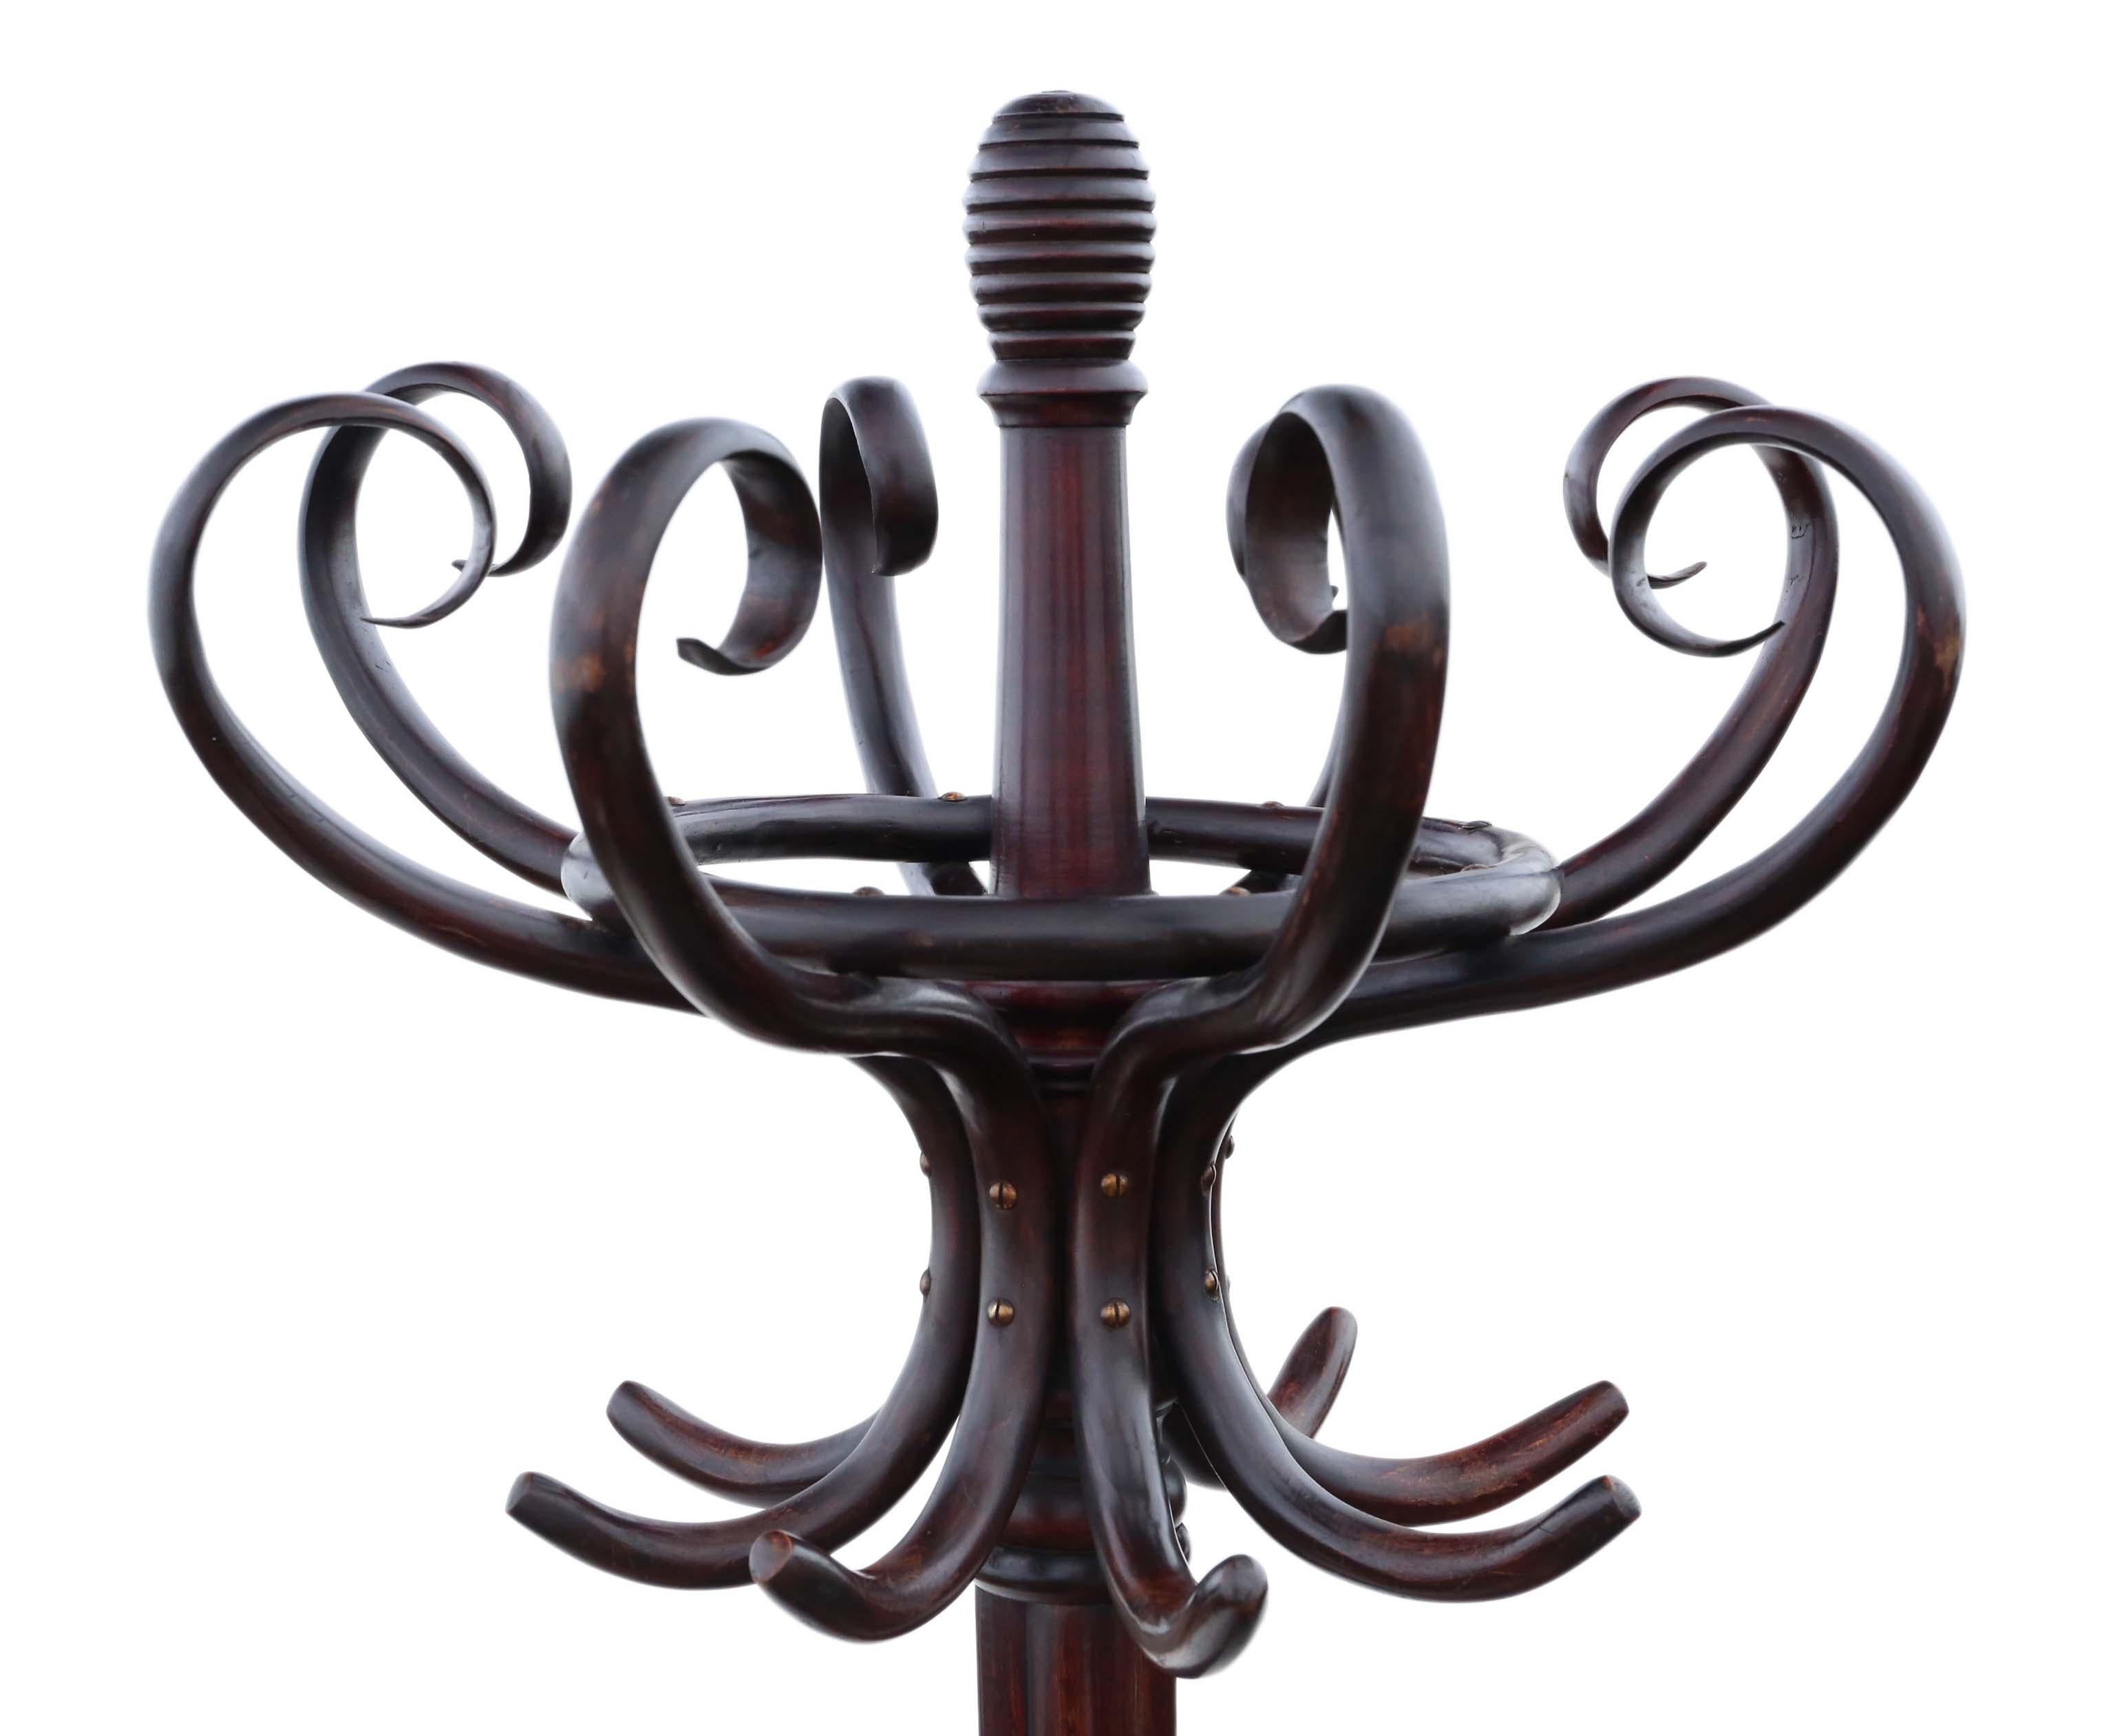 Antique fine quality Victorian bentwood hall, coat, hat, stick, umbrella, stand. 8 rotating combined coat and hat hooks.

Dates from circa 1900. Lovely age and charm. Far better than most.

Solid, heavy and strong with no loose joints and no